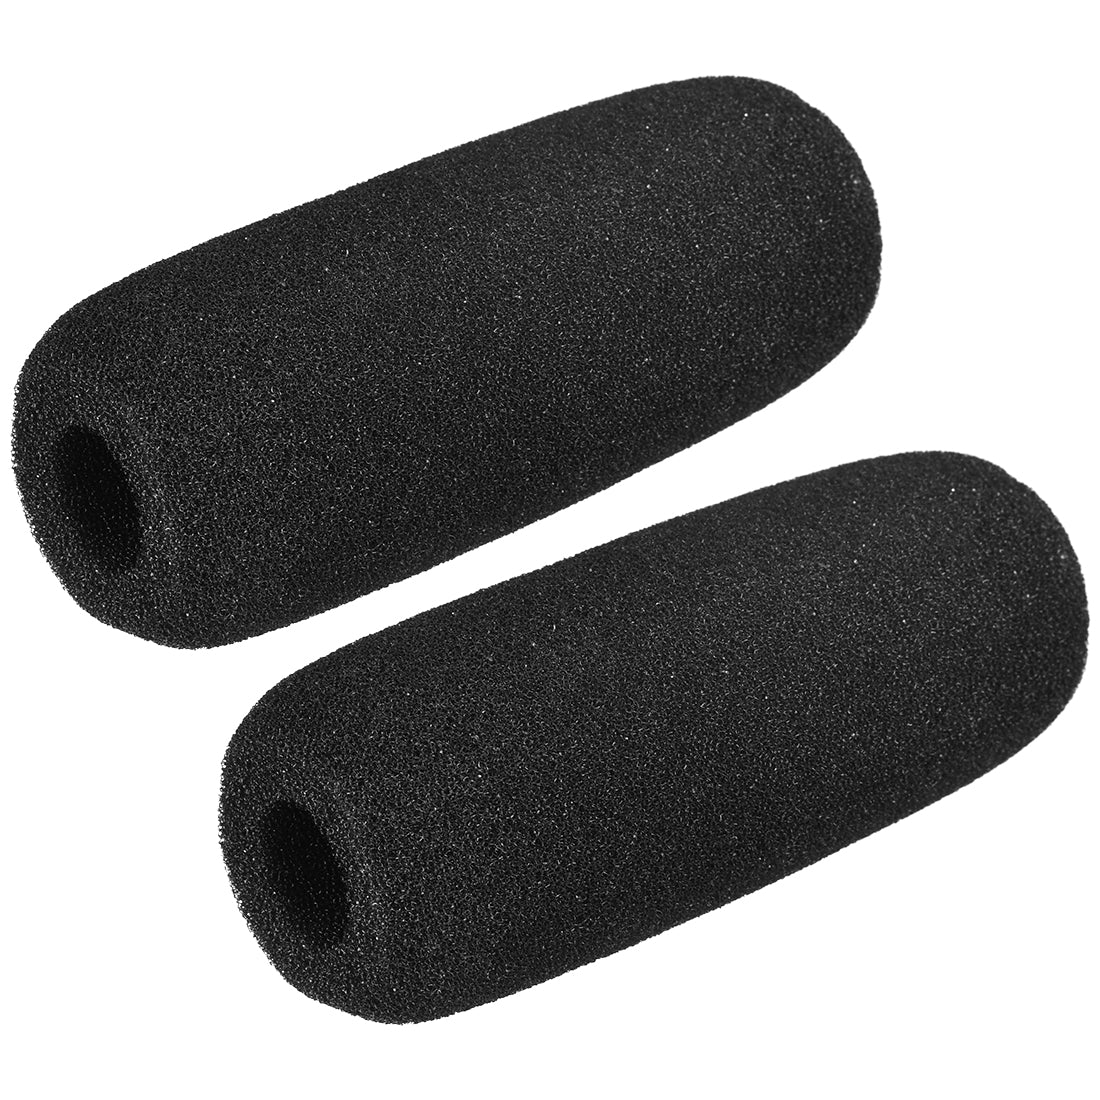 uxcell Uxcell 2PCS Sponge Foam Mic Cover Interview Microphone Windscreen Shield Protection Black 126mm Long